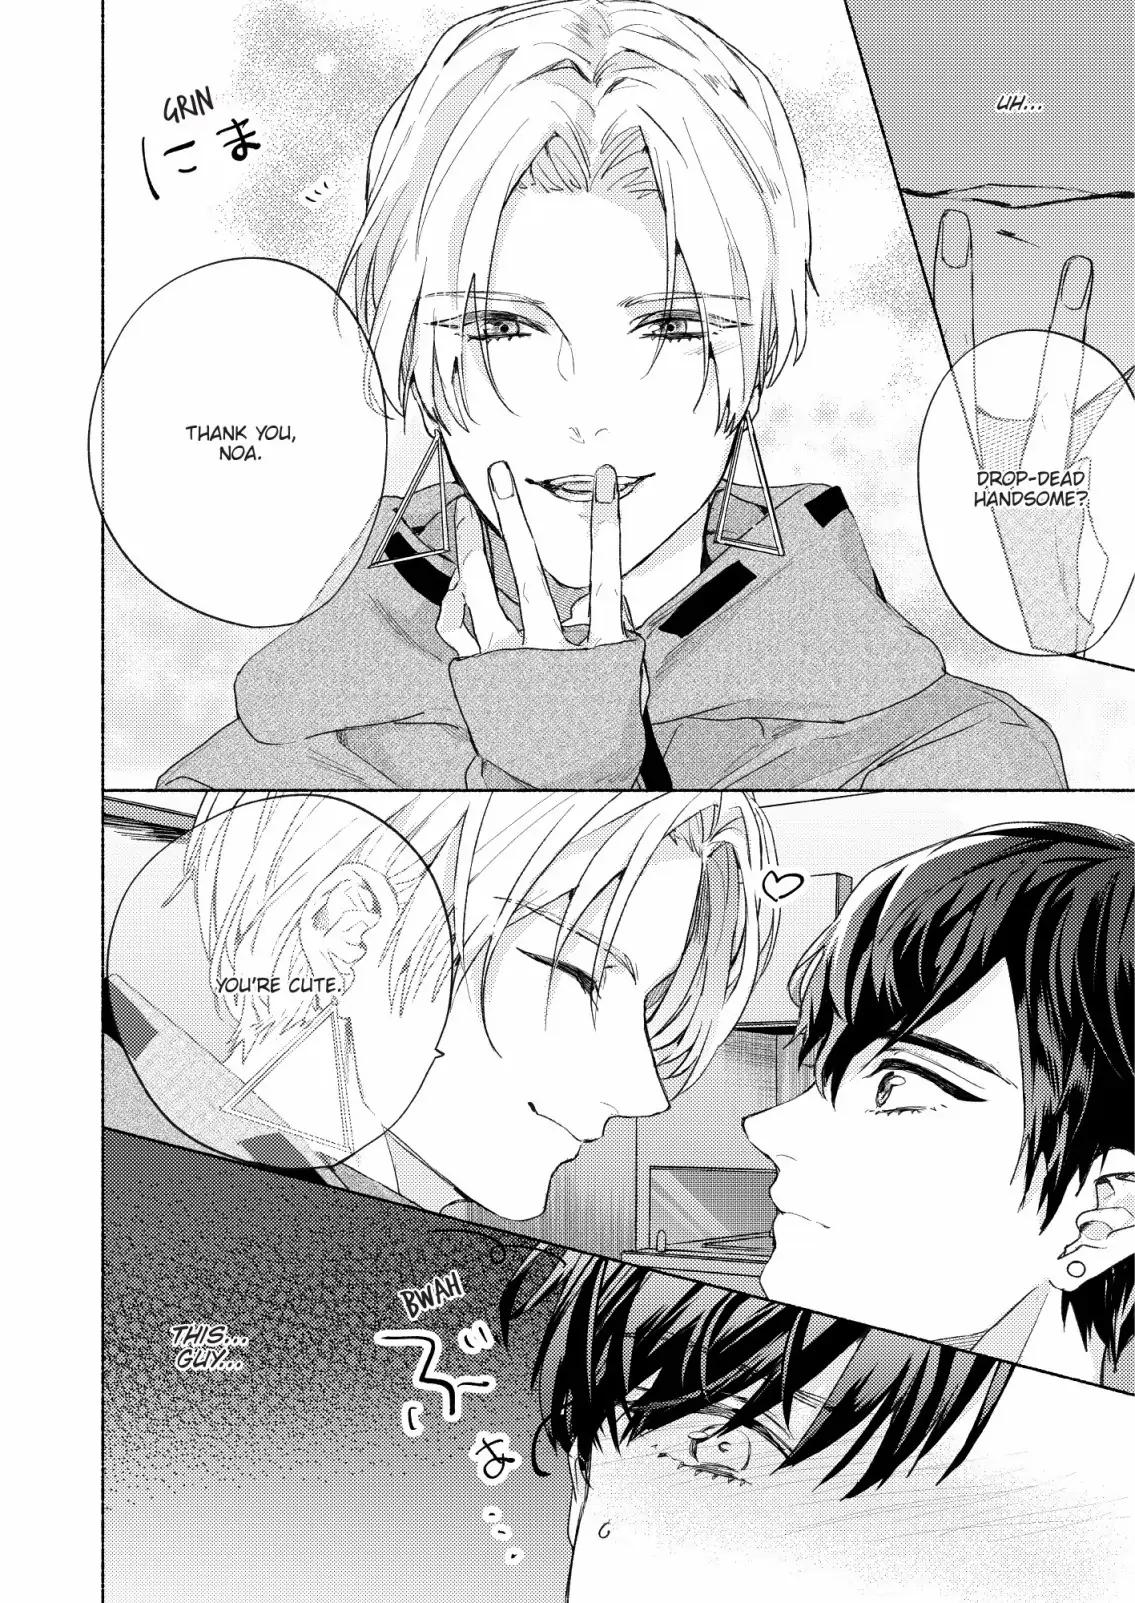 Kiss Me Crying Ch.1 Page 11 - Mangago